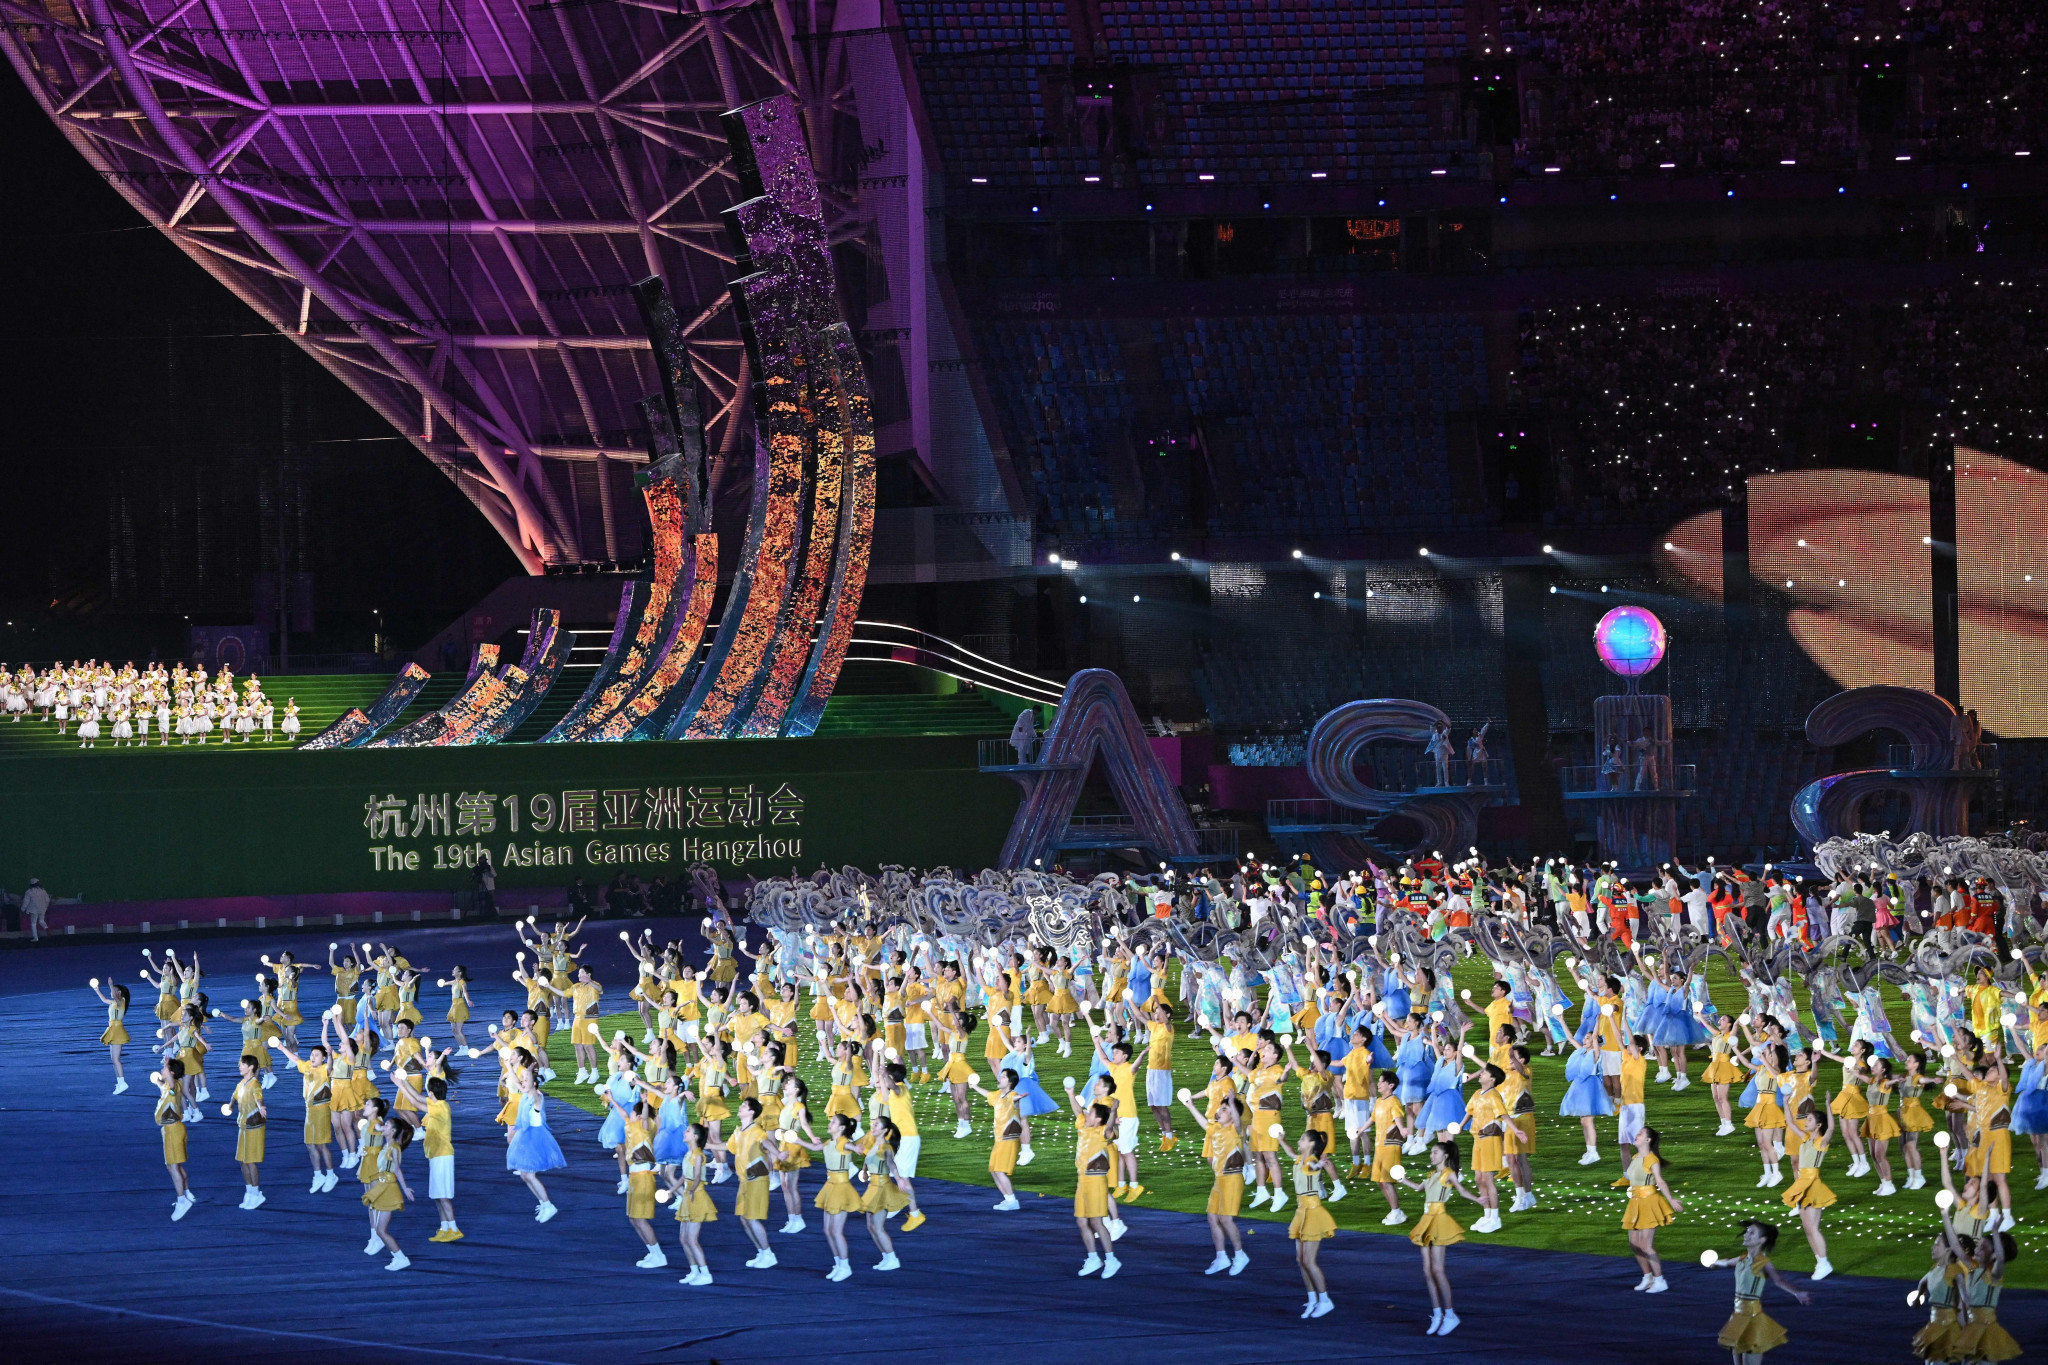 insidethegames is reporting LIVE from the Hangzhou 2022 Asian Games Closing Ceremony